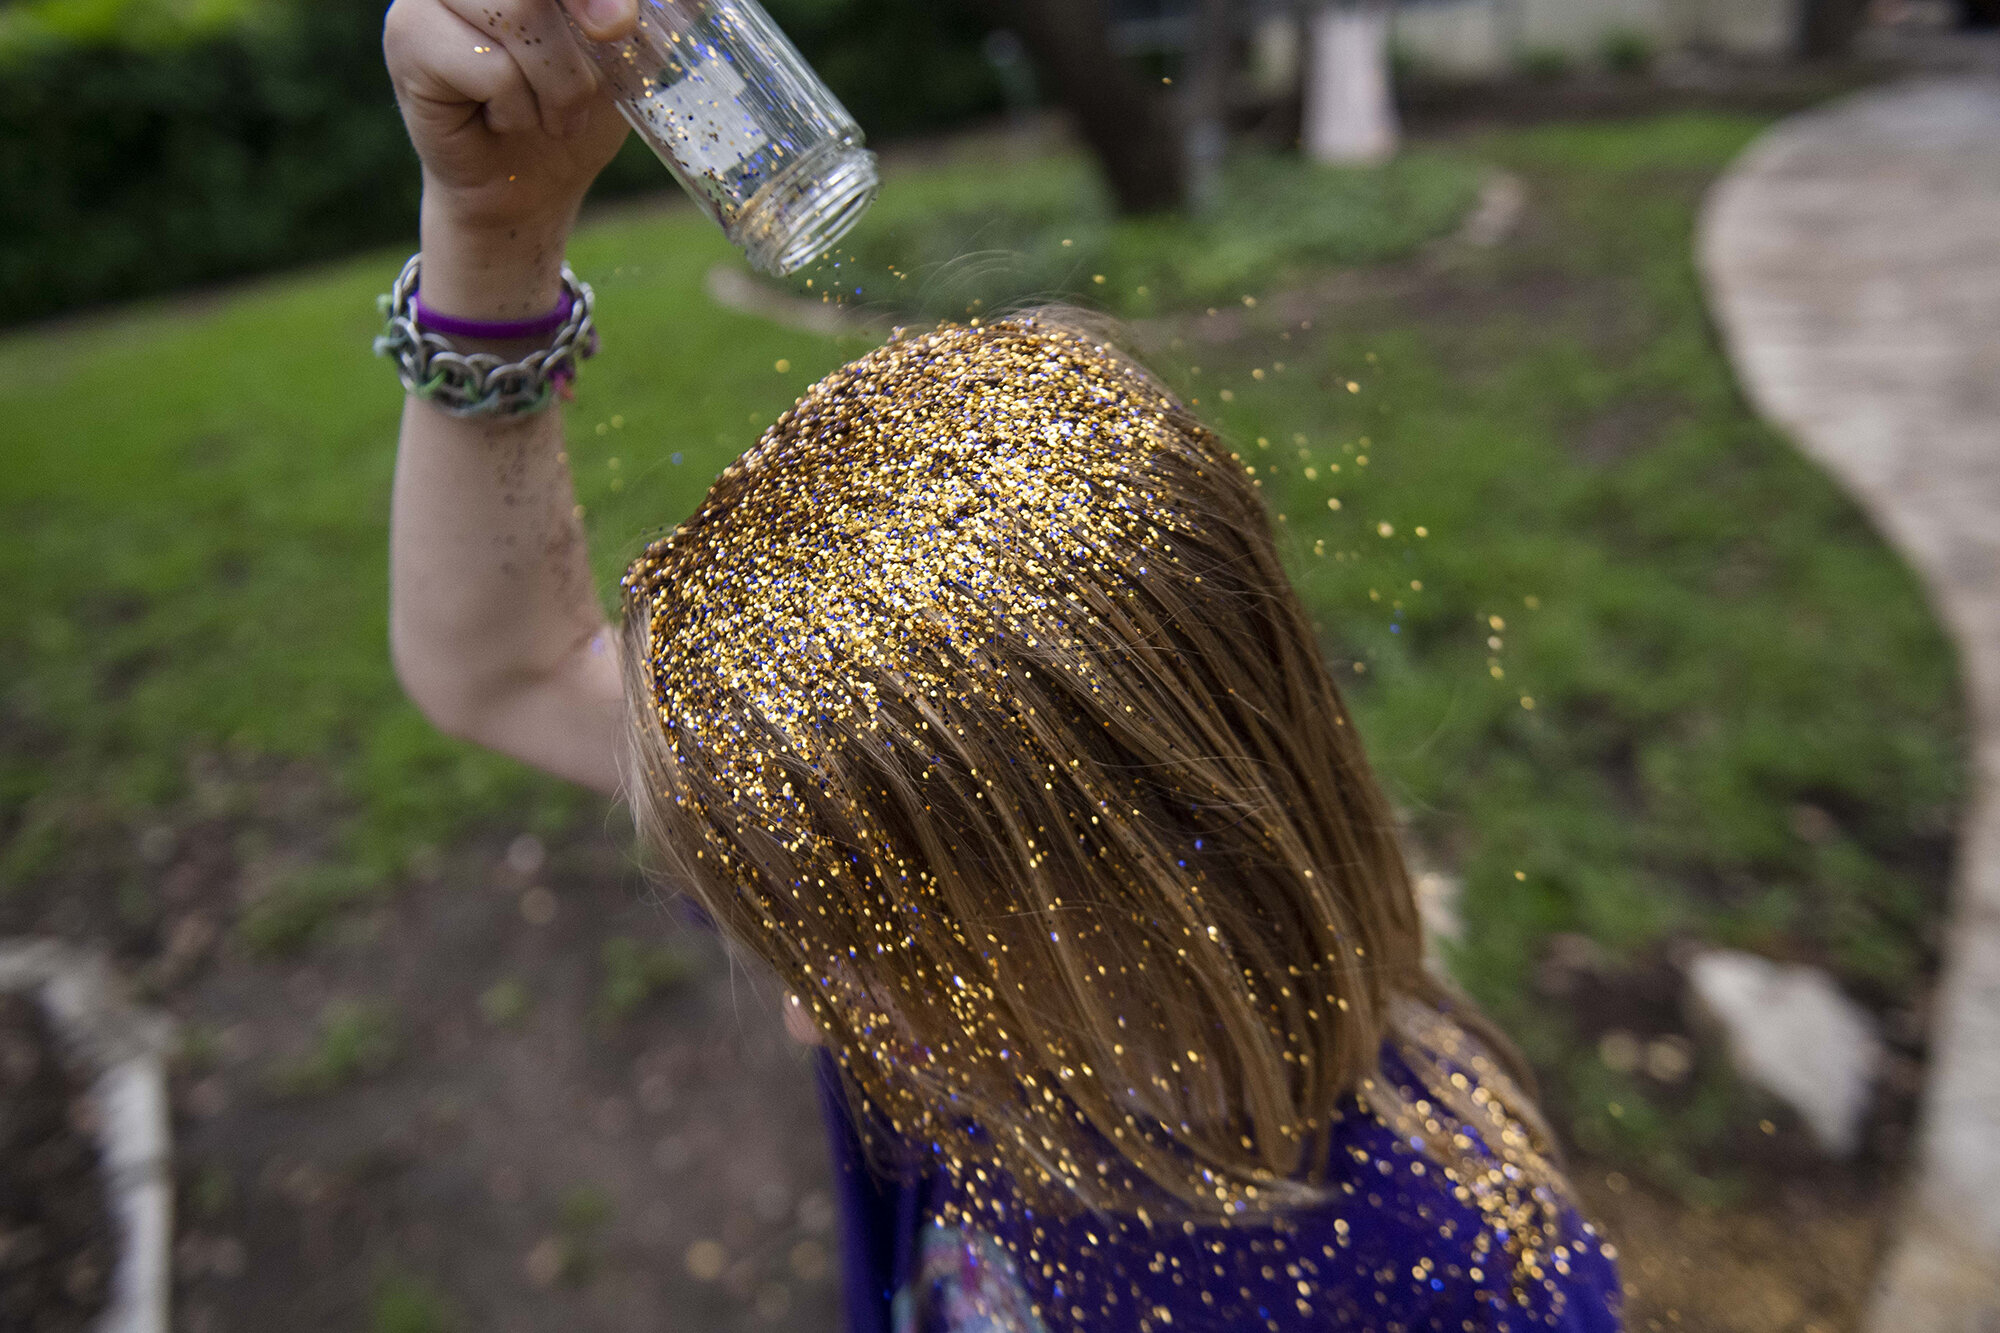  Keegan pours glitter on his head during a his 9th birthday party. The glitter party was inspired by a Queer Eye episode. Keegan's family says he motivated to try drag after watching RuPaul's Drag Race. 